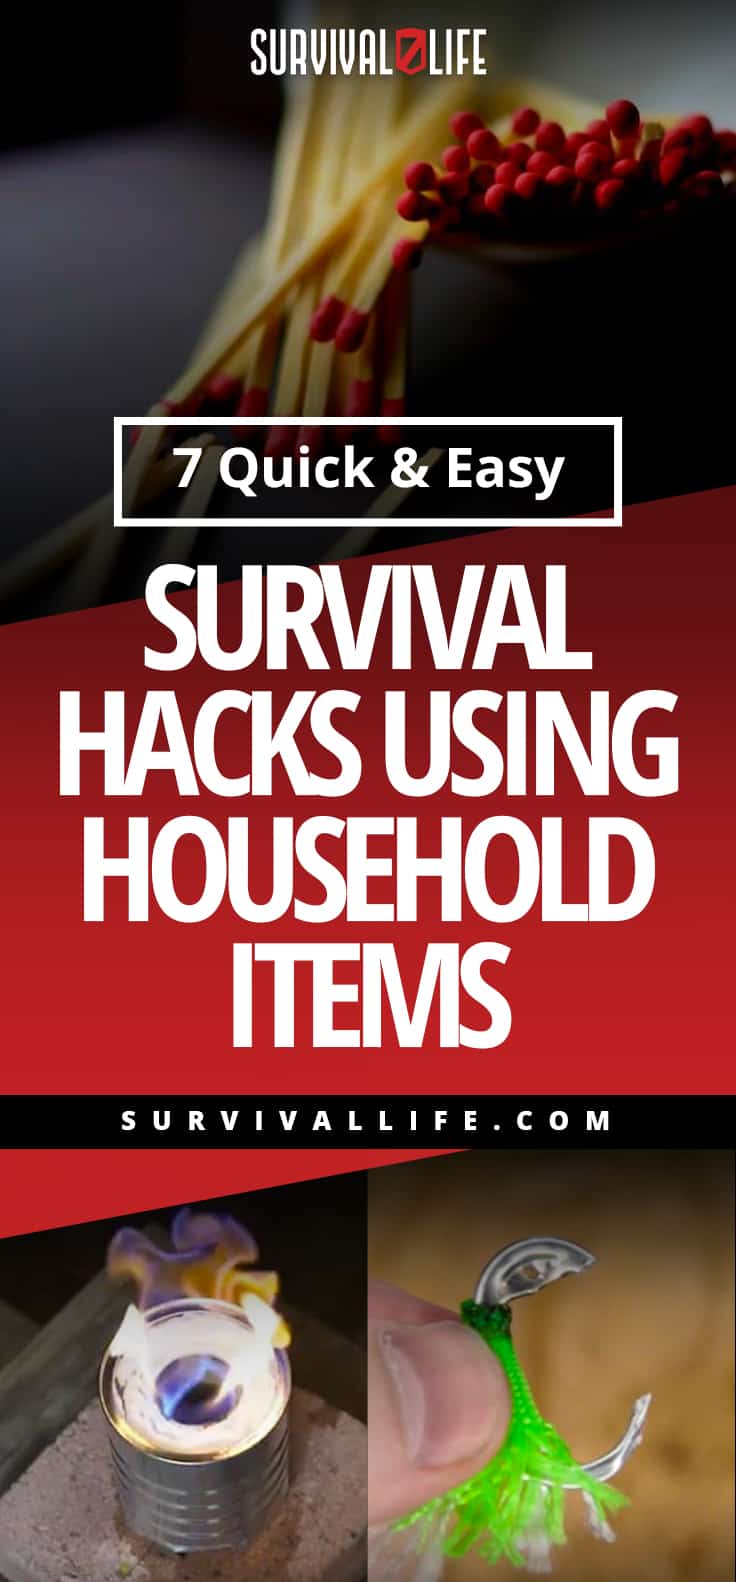 Quick & Easy Survival Hacks Using Household Items | https://survivallife.com/household-survival-hacks/